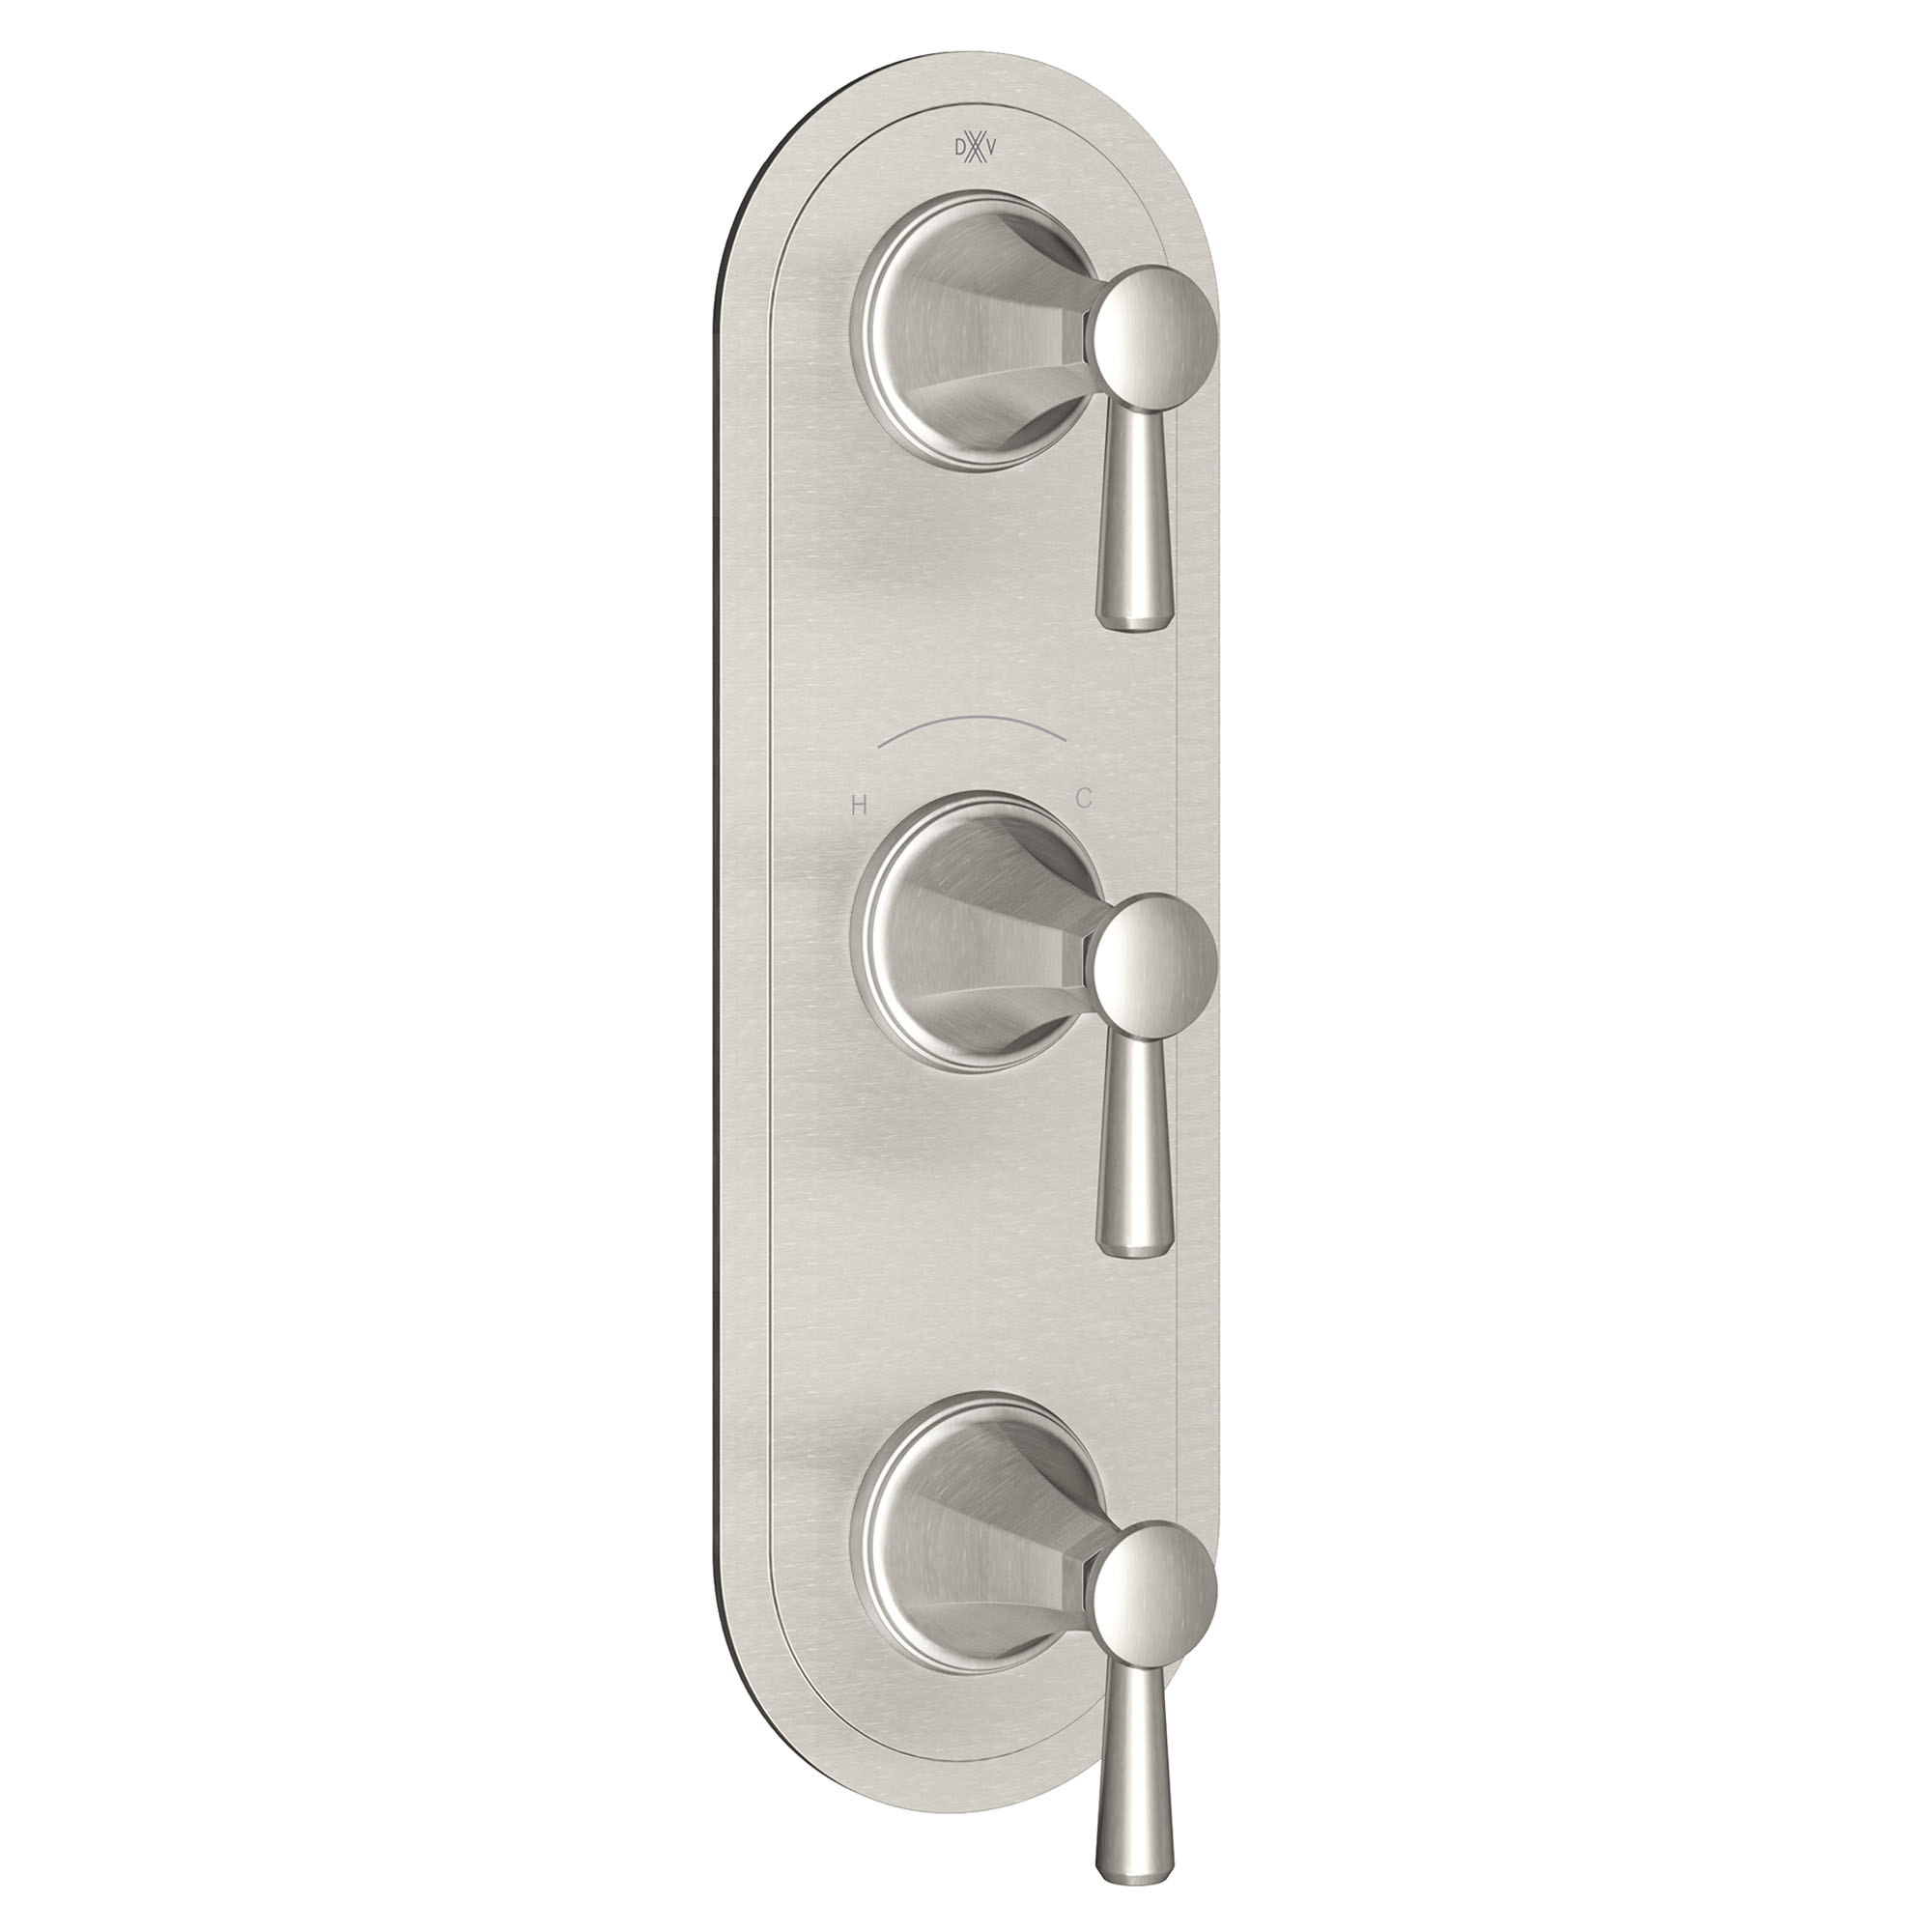 Fitzgerald 3-Handle Thermostatic Valve Trim Only with Lever Handles